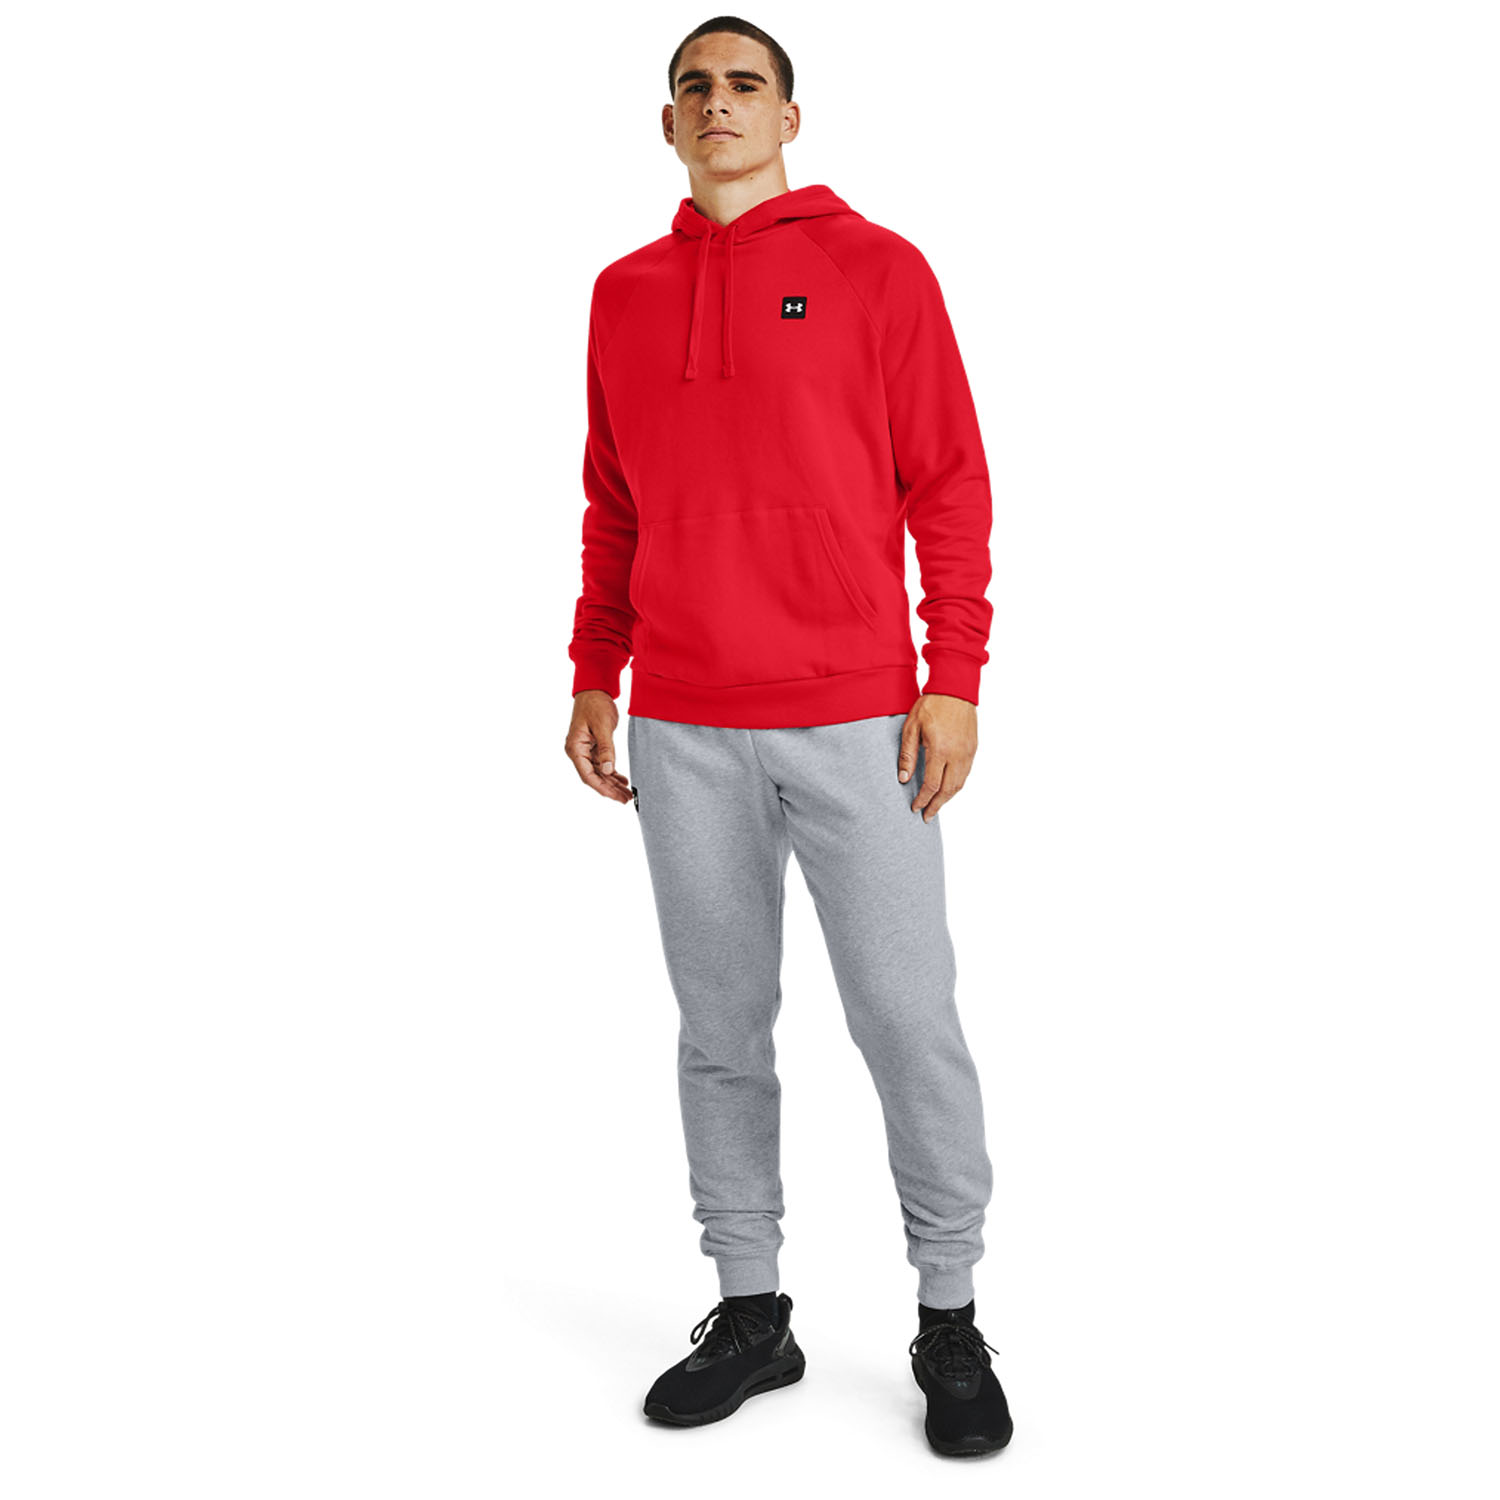 Under Armour Rival Fleece Men's Tennis Hoodie - Red/Onyx White